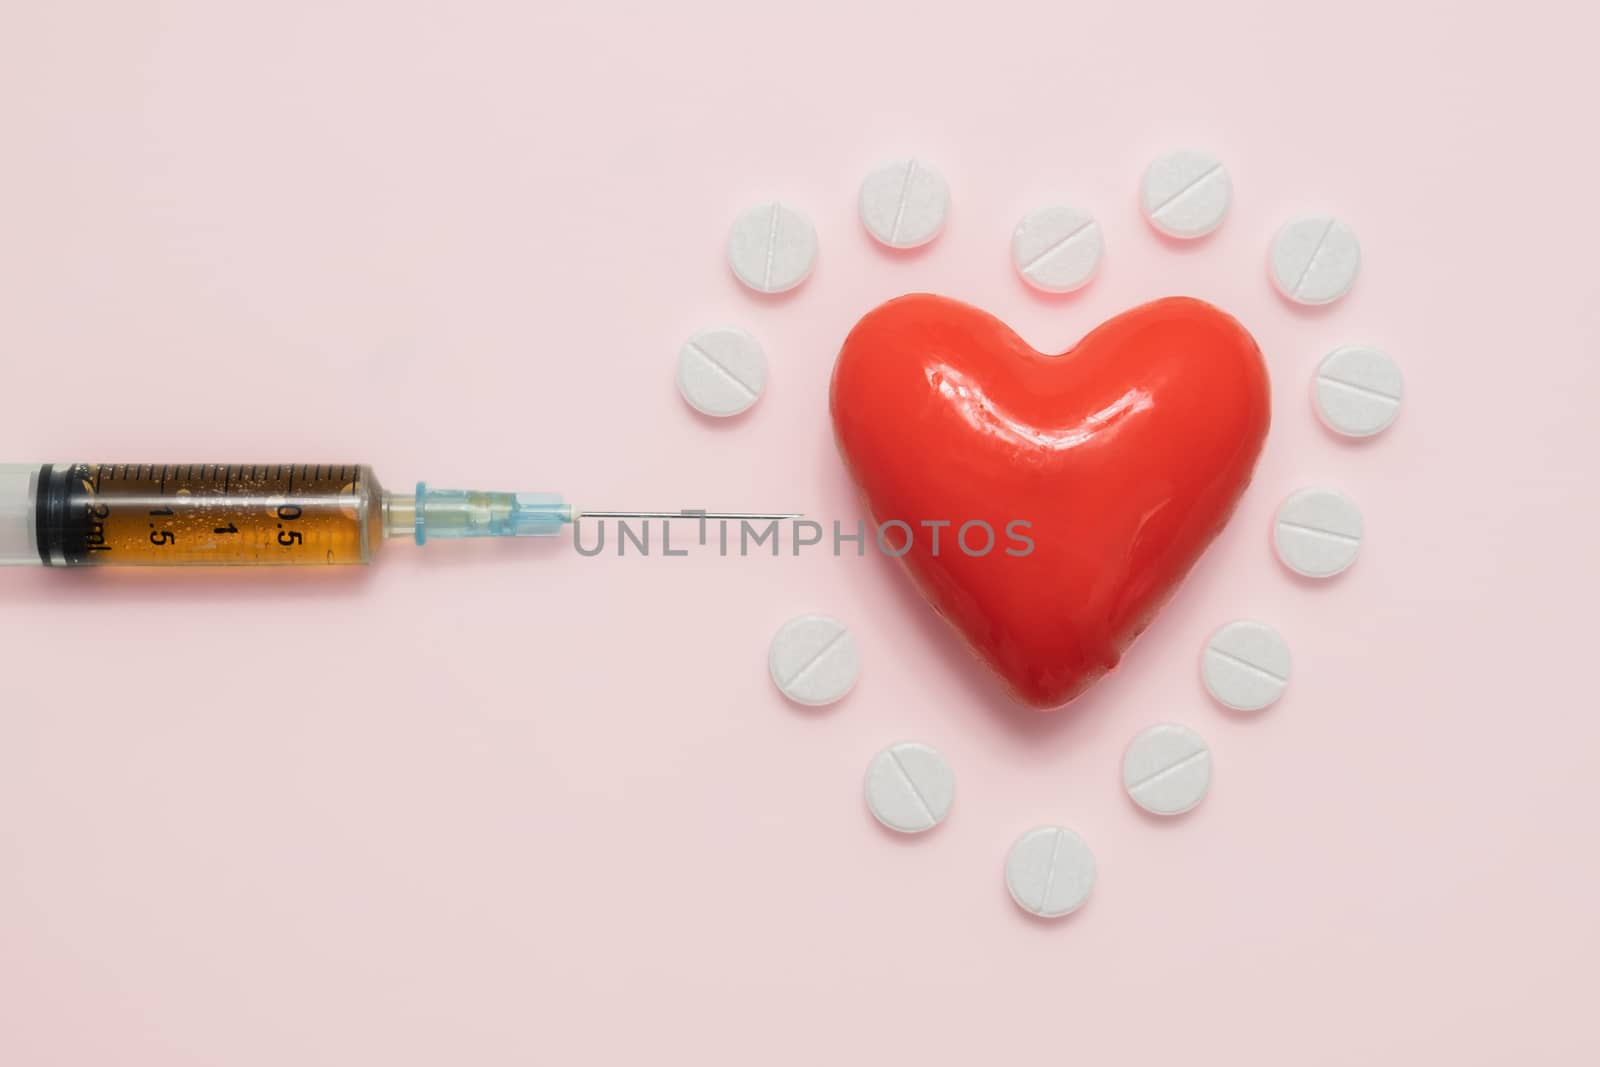 Heart, pills and syringe on pink backround, top view. by photoboyko